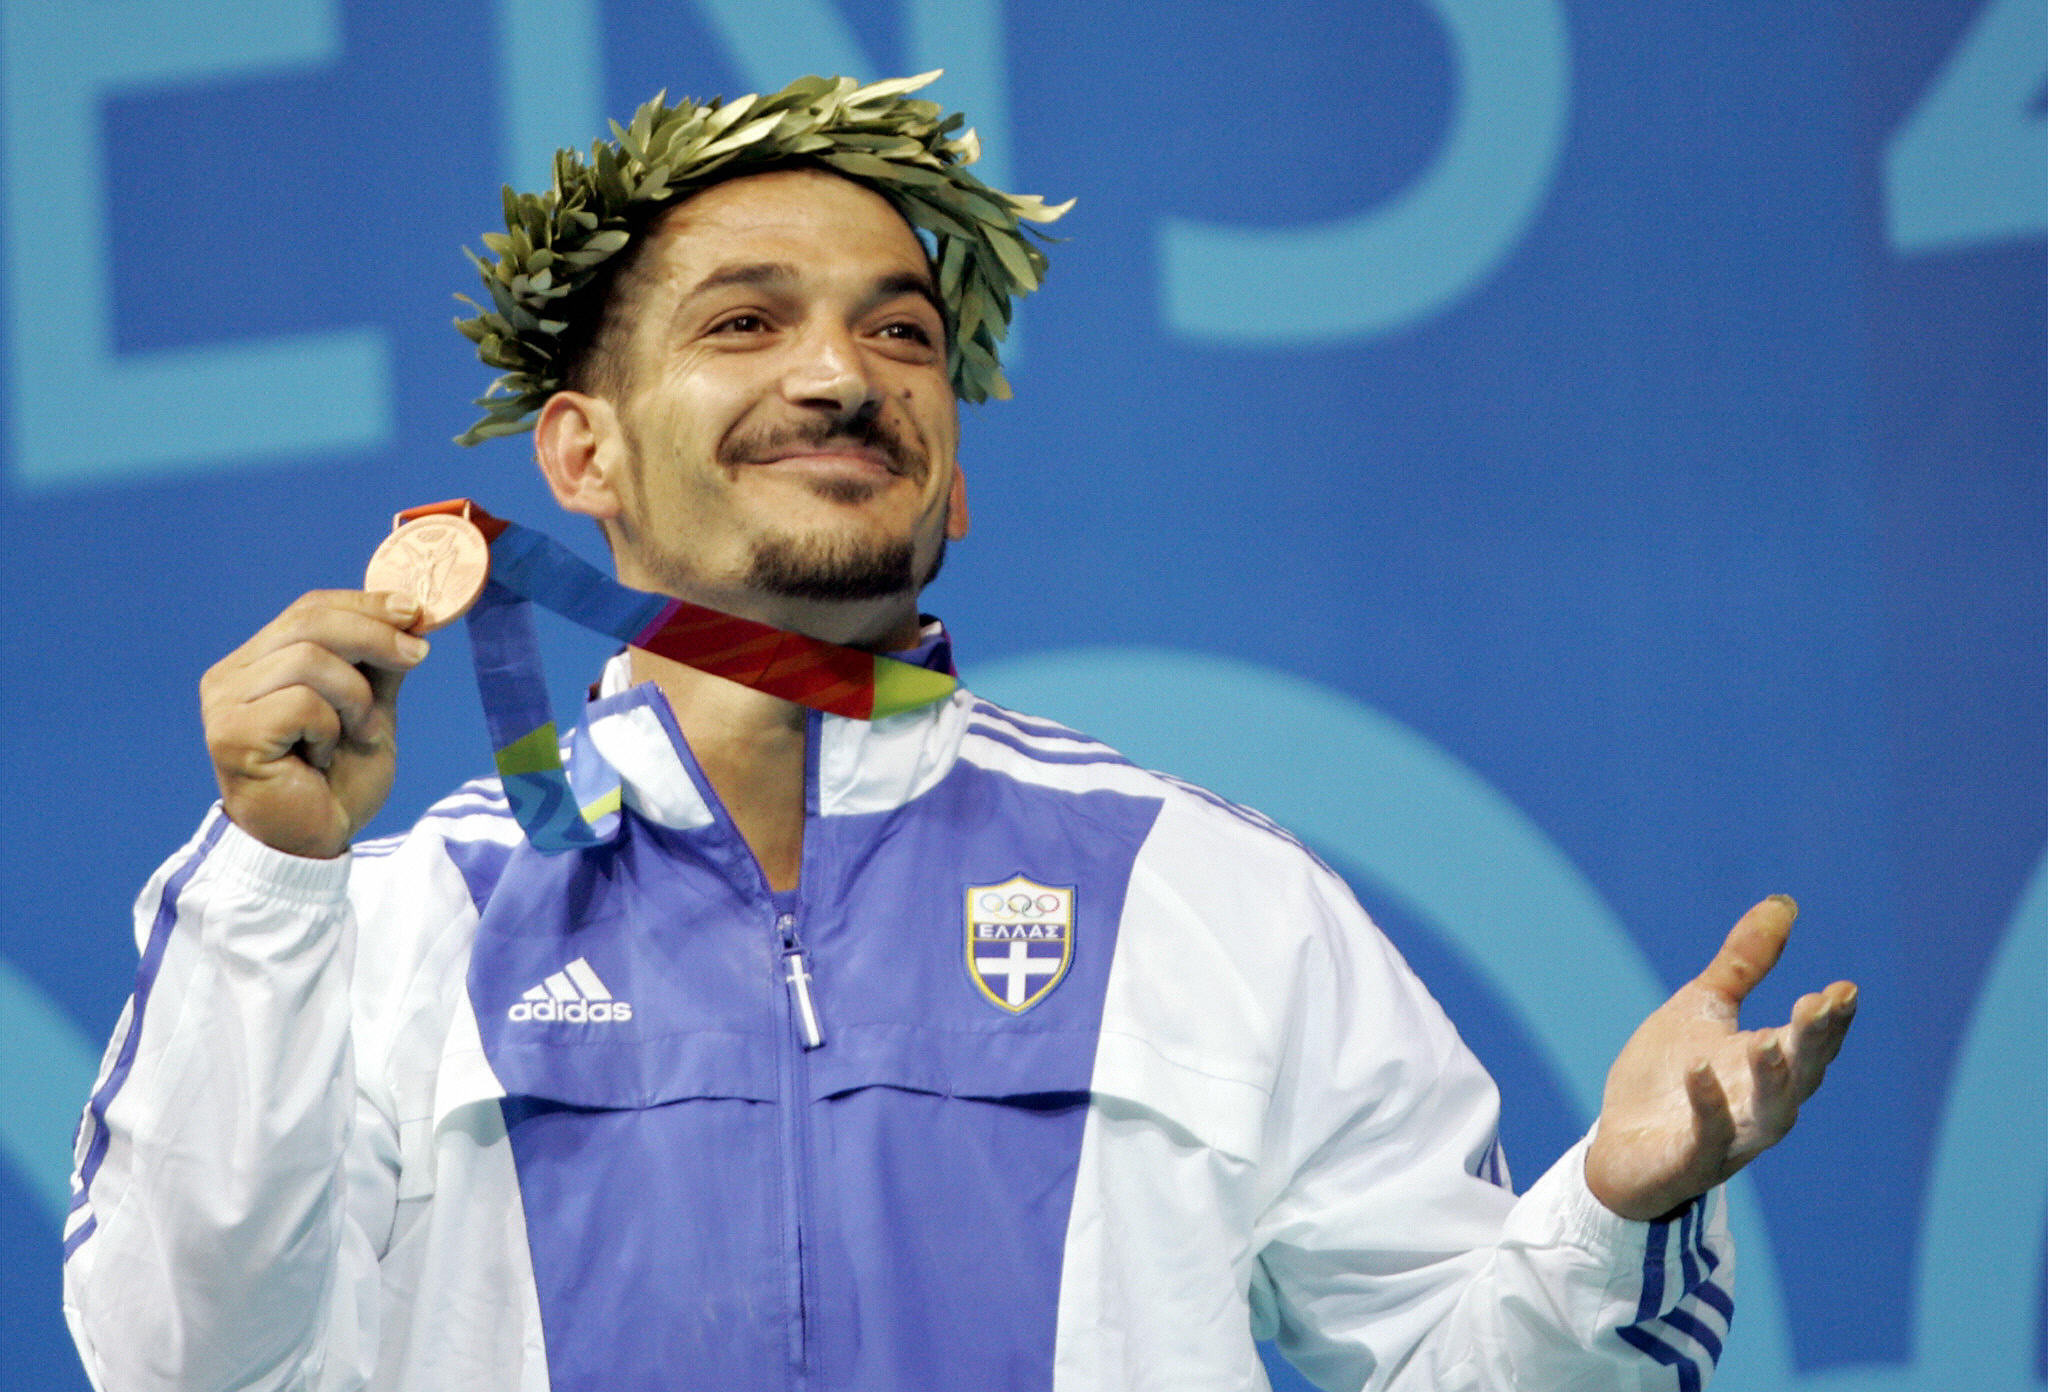 Three-time Olympic champion Pyrros Dimas of Greece is among those running to become IWF President ©Getty Images